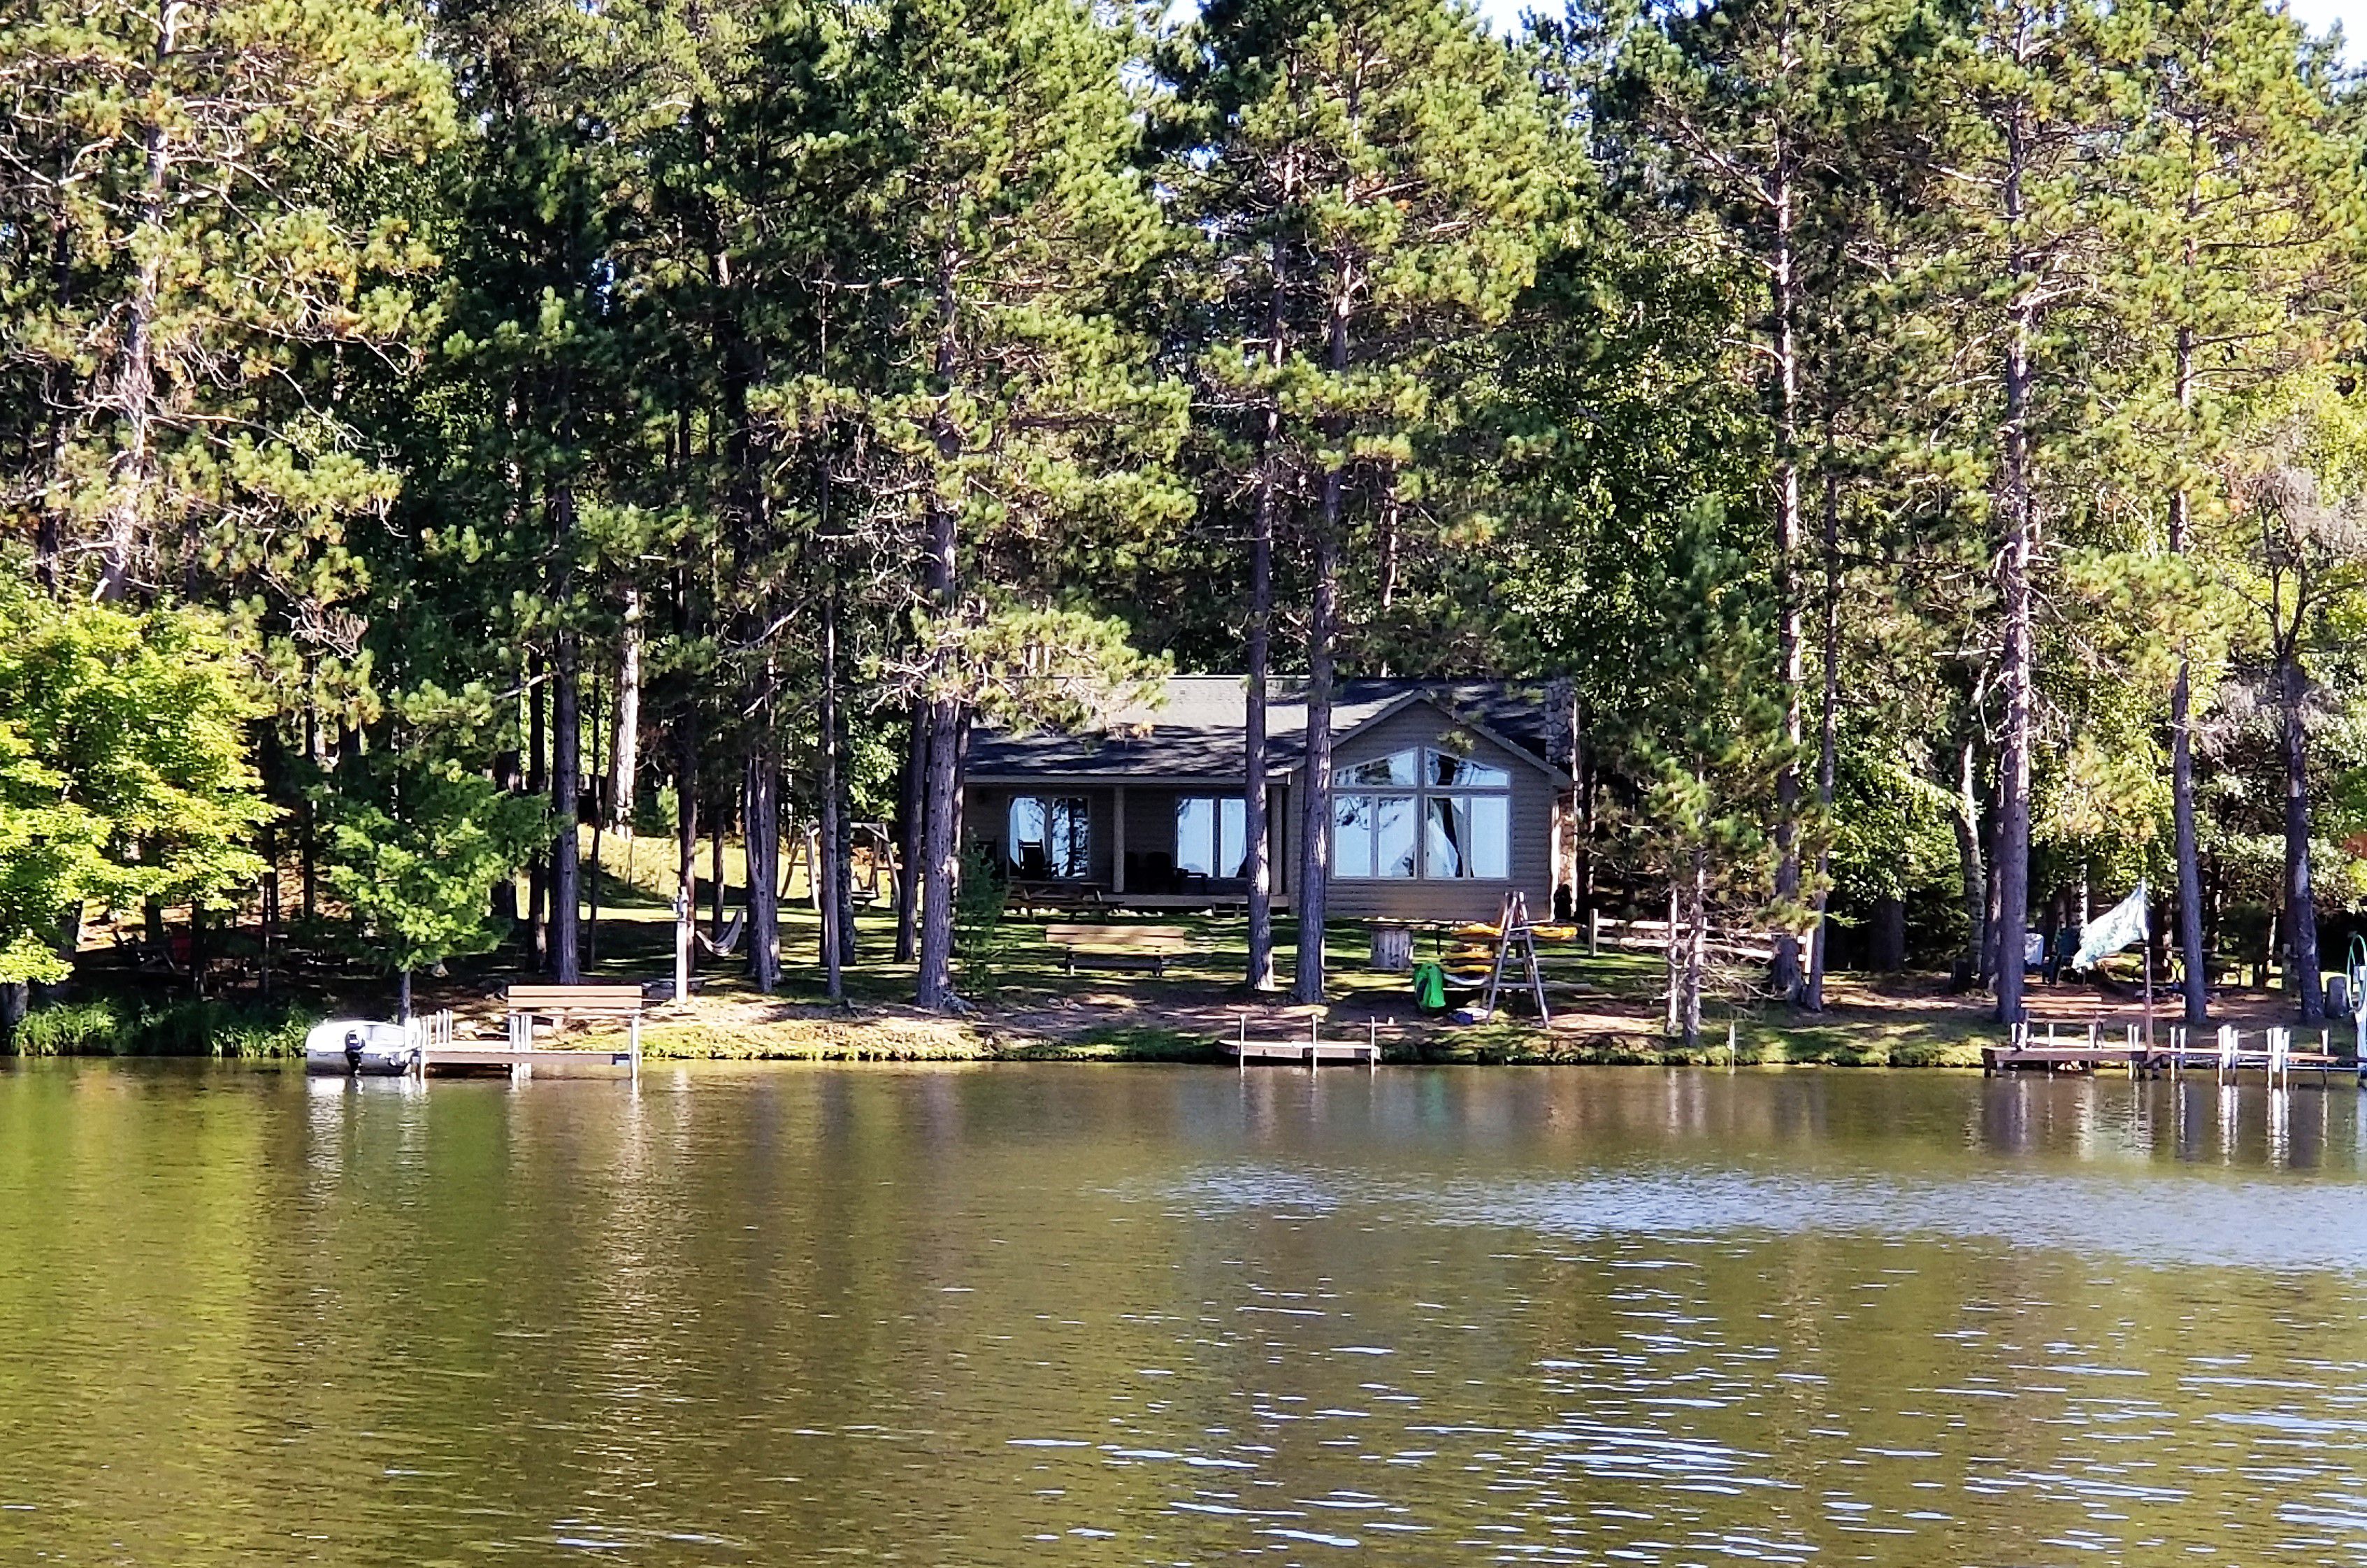 Consider LakeHome 10 for a special experience